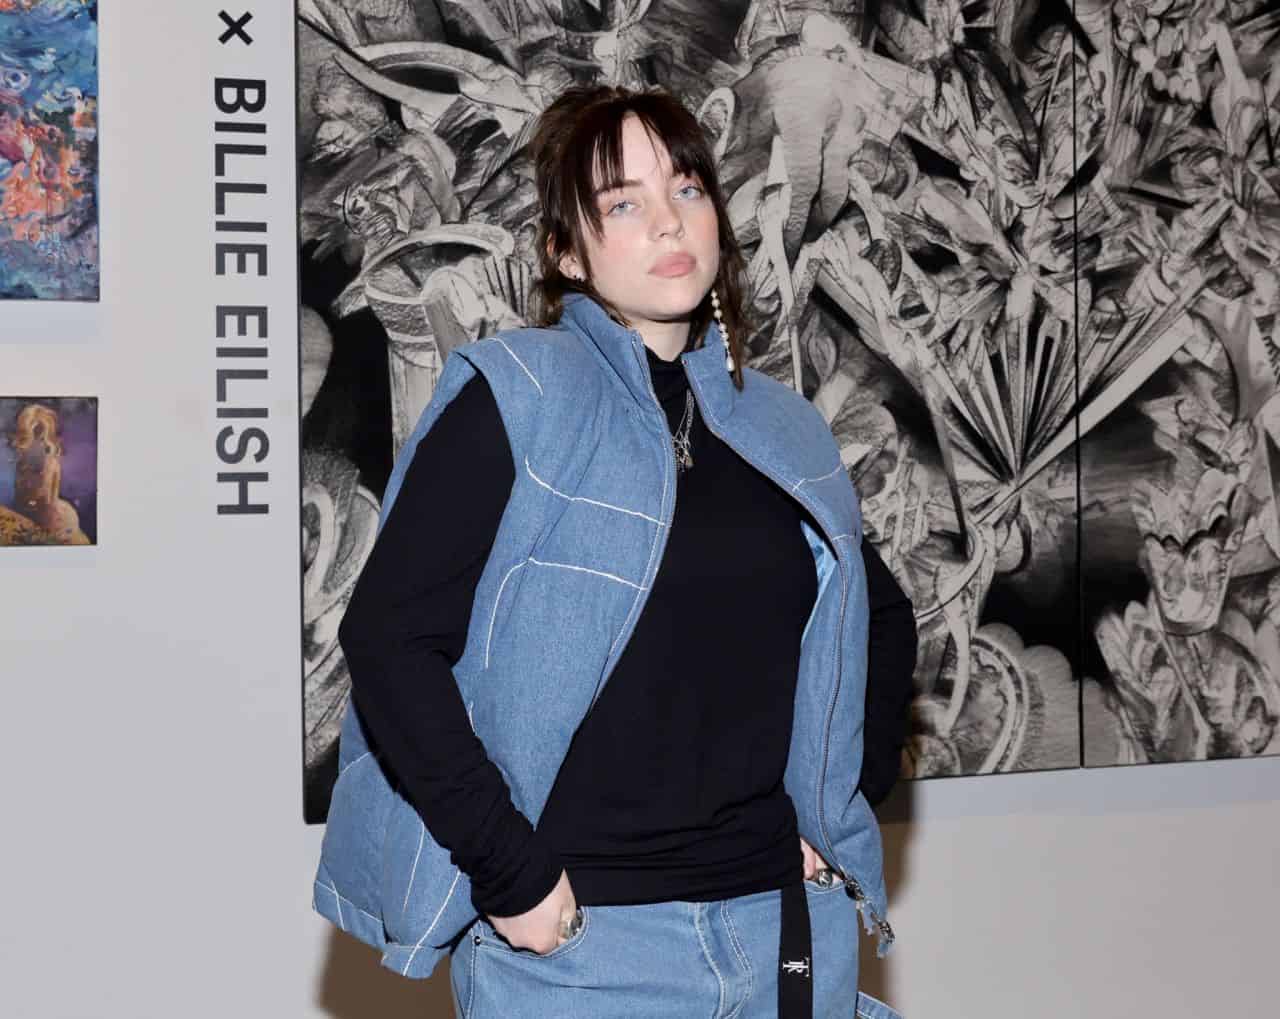 Billie Eilish Attends Interscope's 30th-Anniversary Exhibit at the LACMA